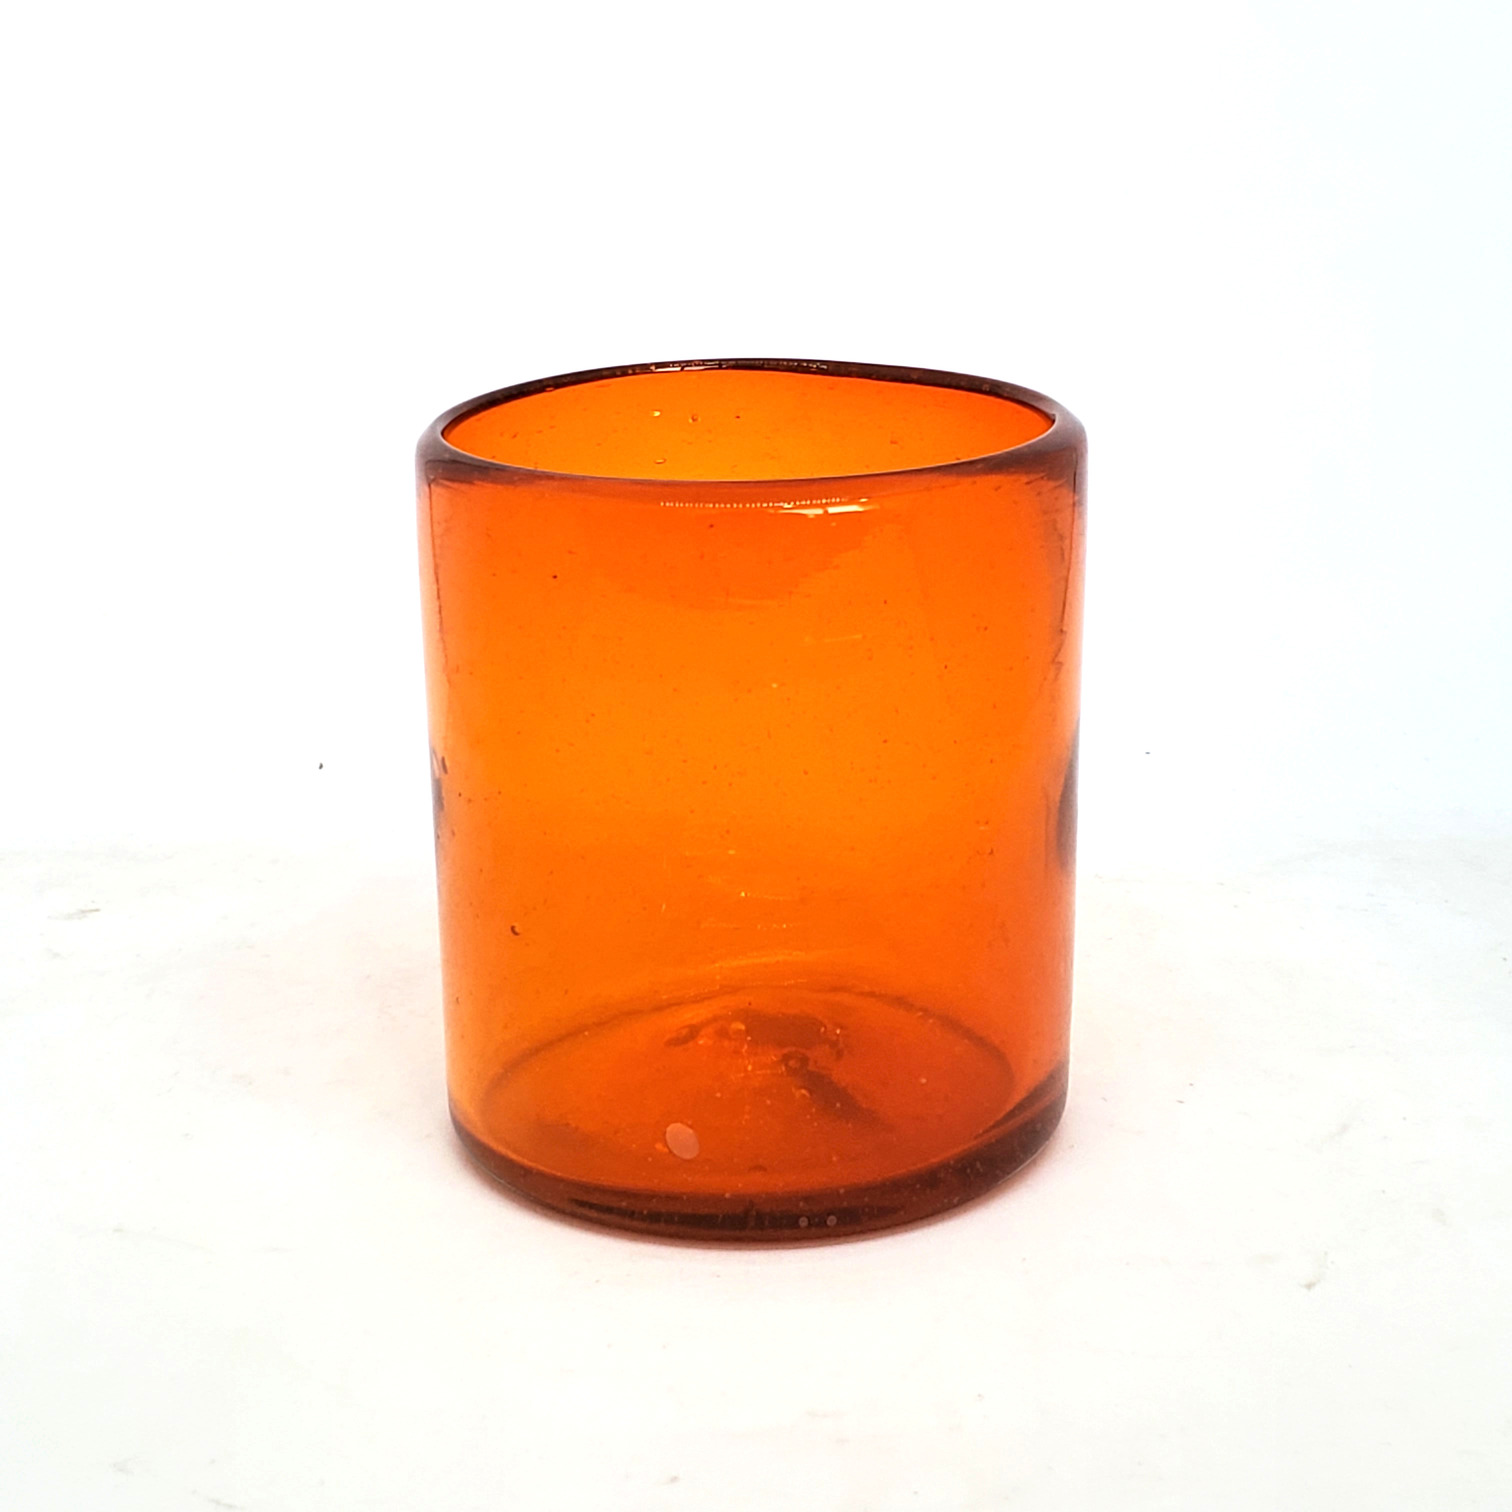 New Items / Solid Orange 9 oz Short Tumblers  / Enhance your favorite drink with these colorful handcrafted glasses.